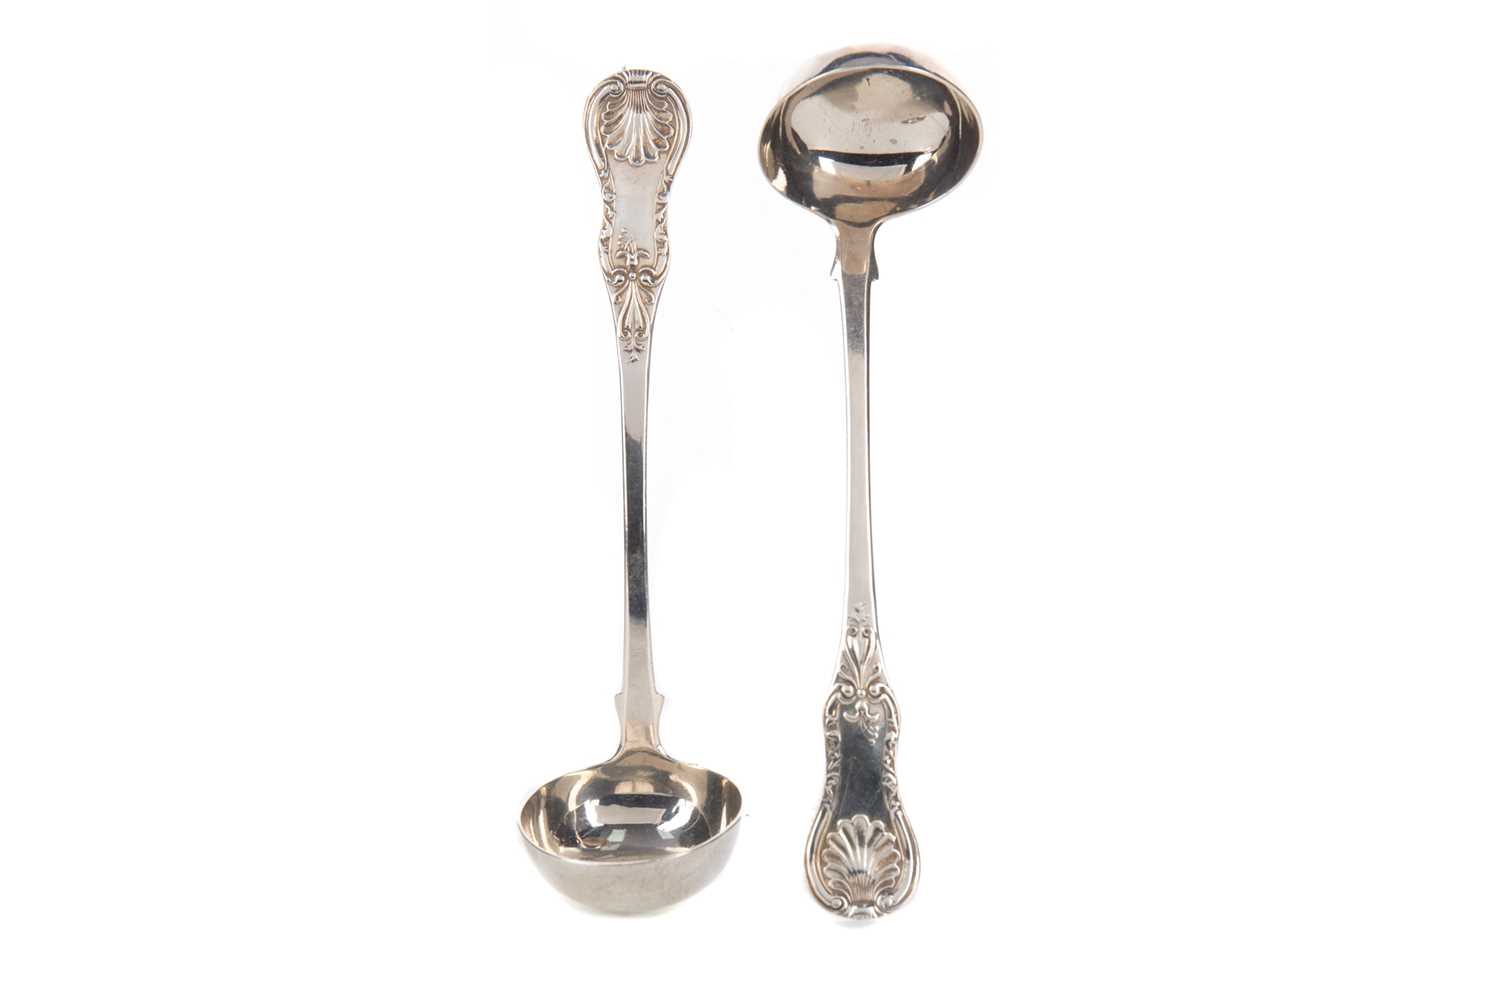 A PAIR OF WILLIAM IV SCOTTISH SILVER TODDY LADLES